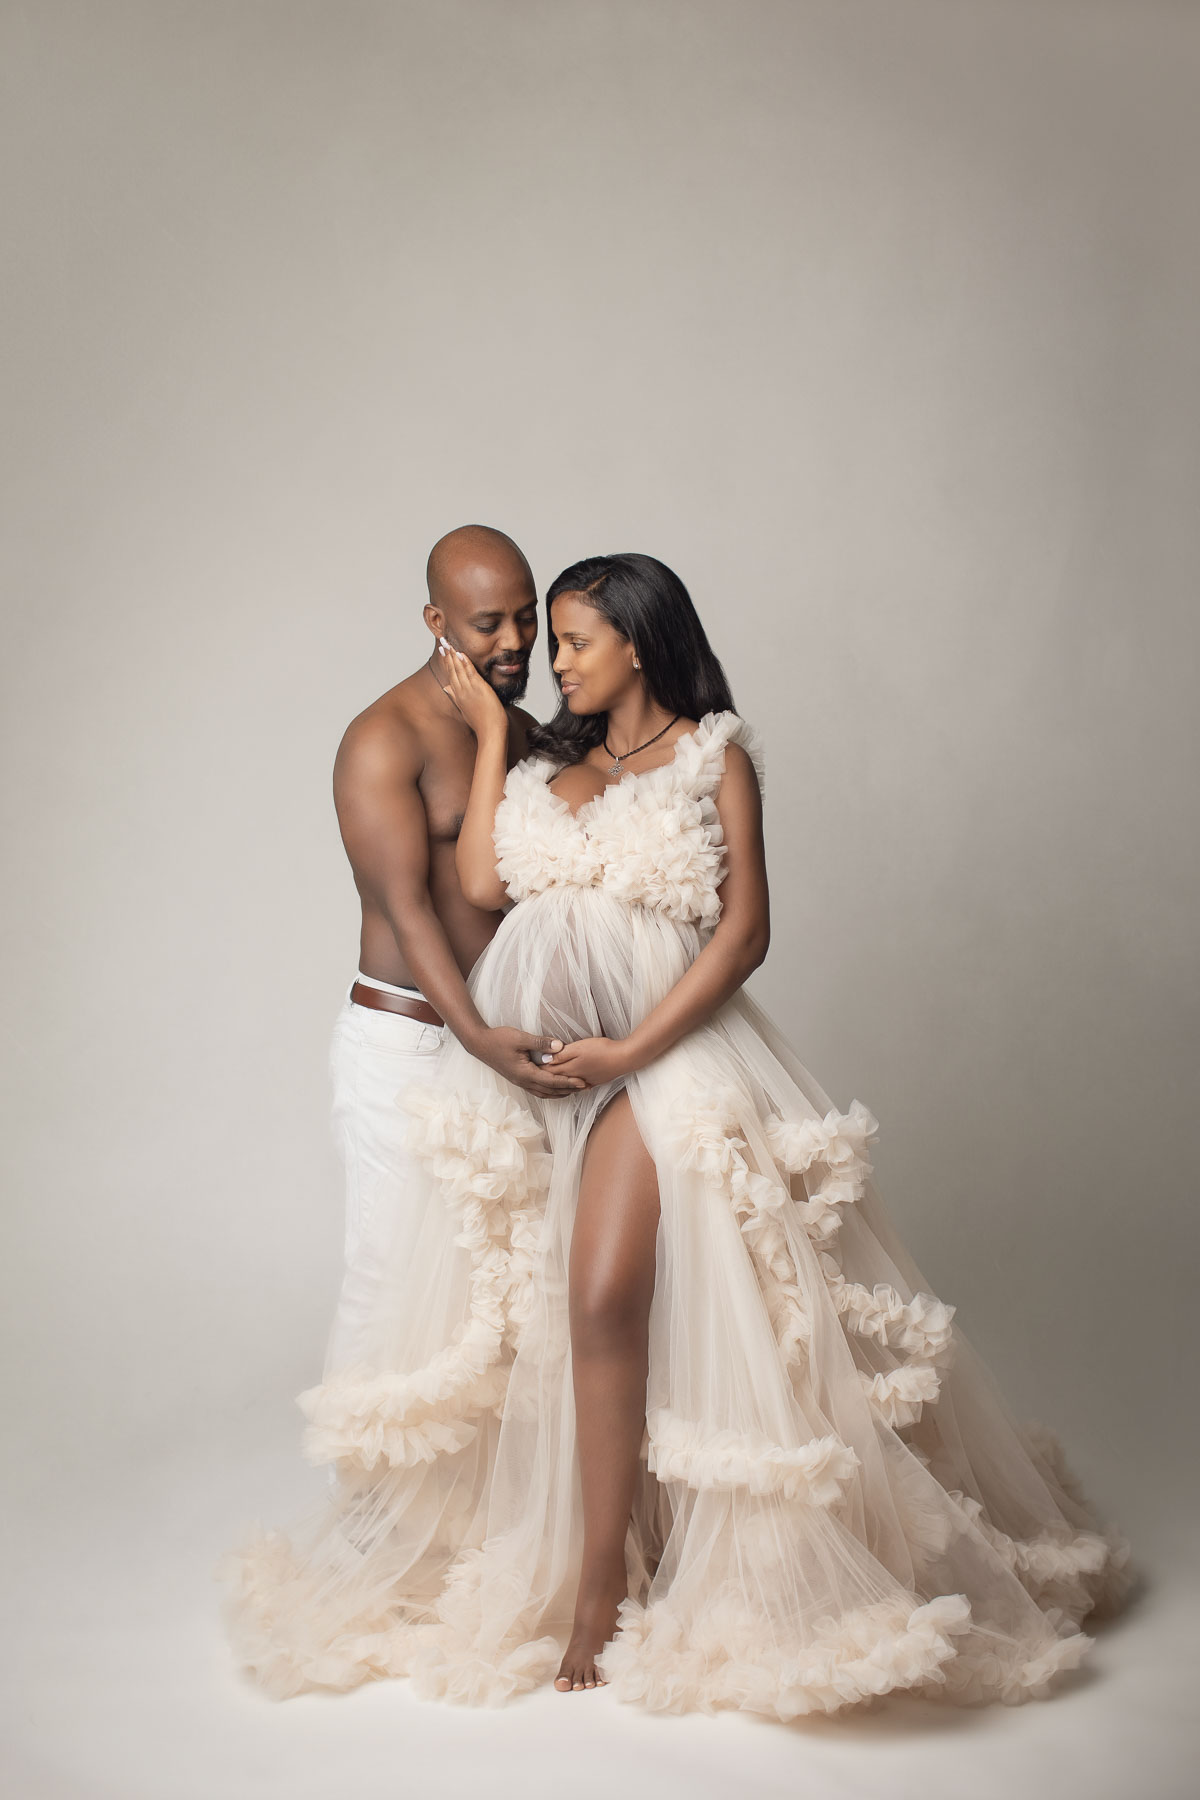 stunning couple pregnancy photo with blush color couture maternity gown